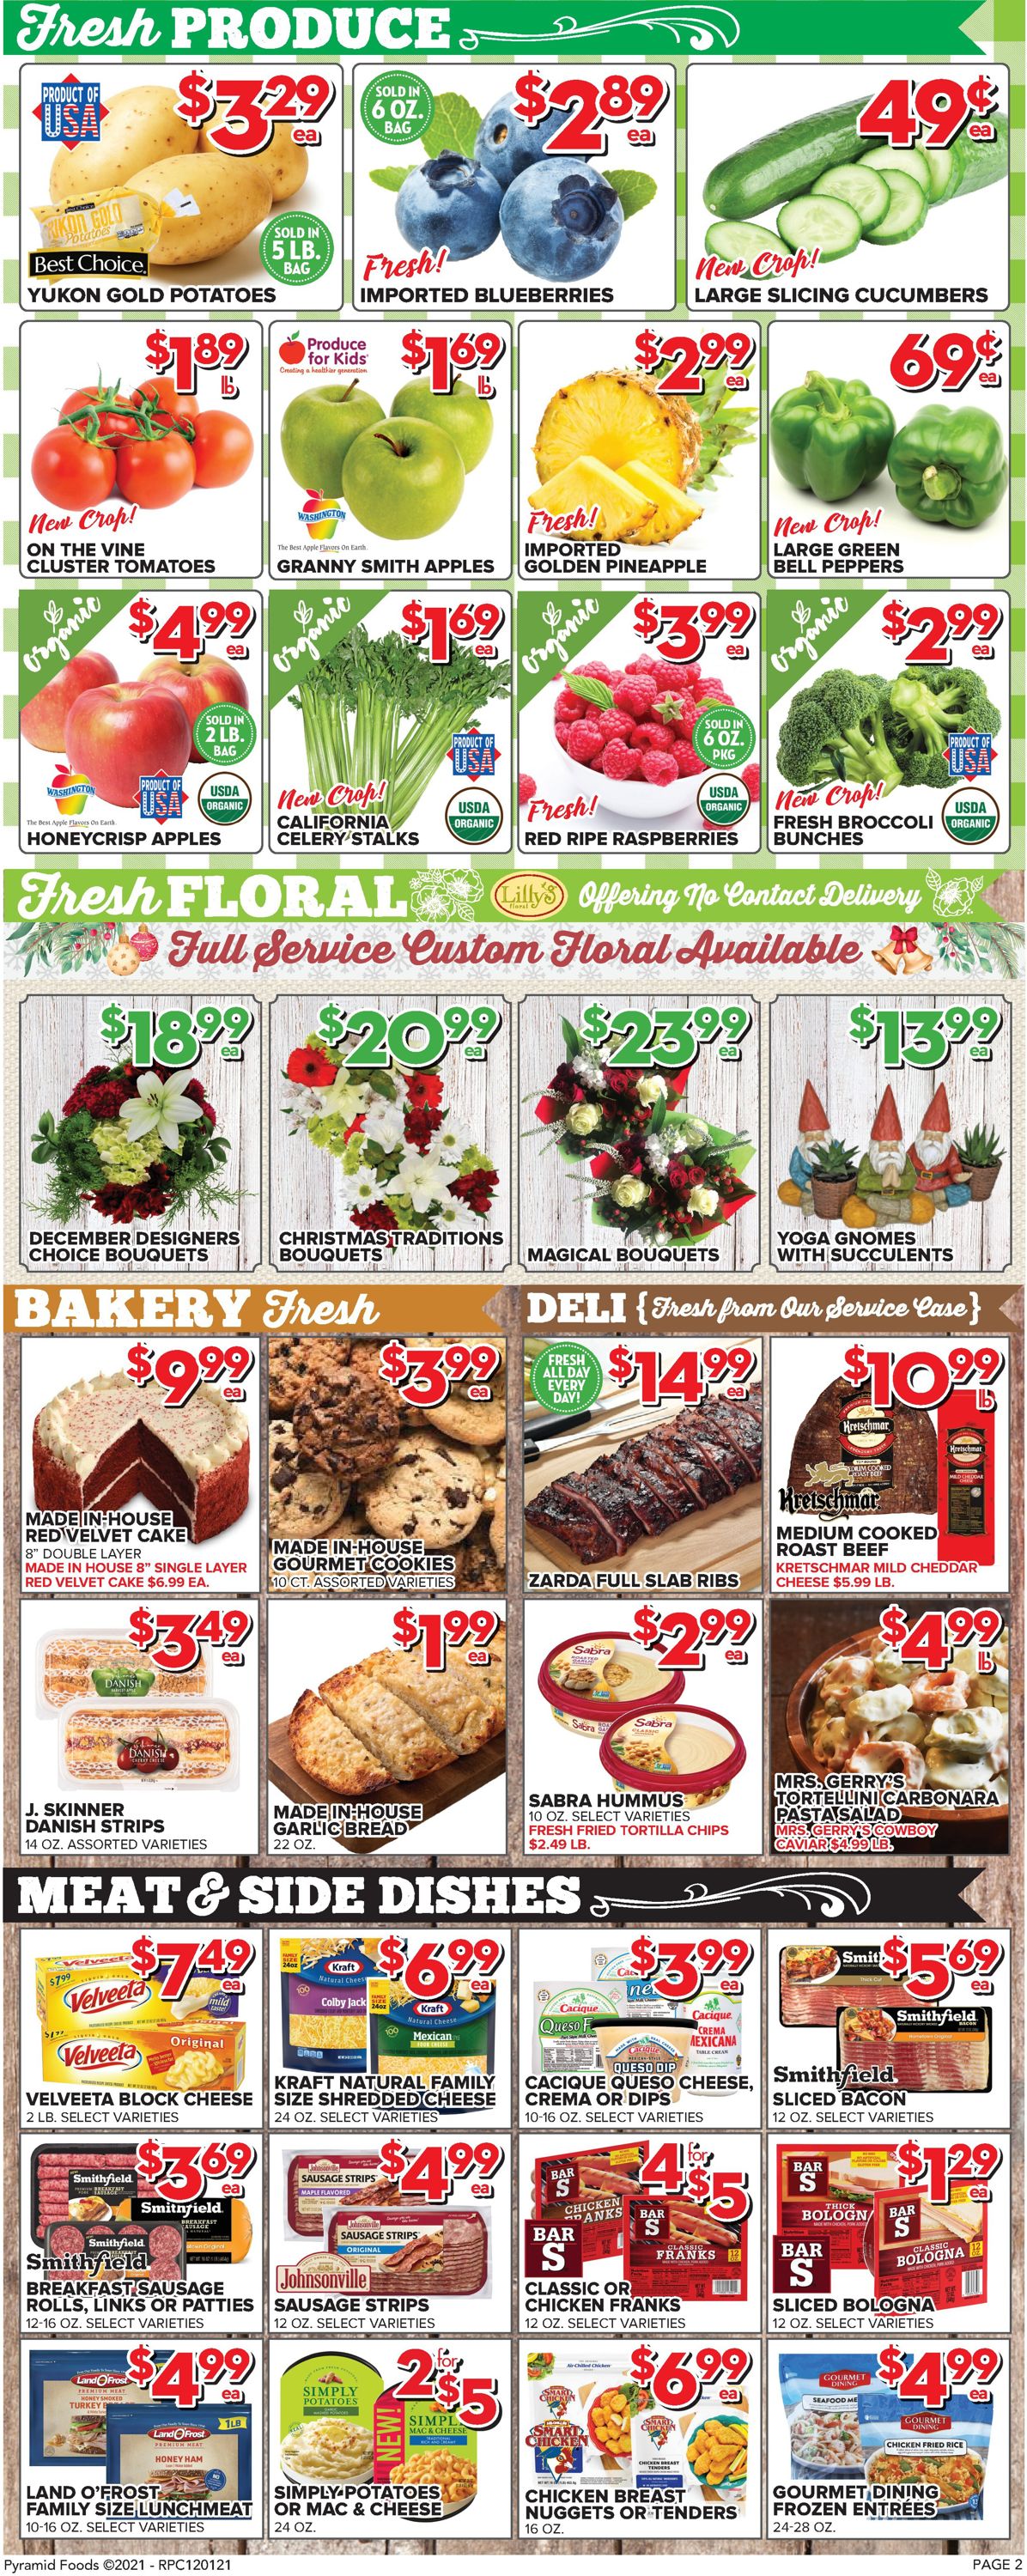 Price Cutter Weekly Ad Circular - valid 12/01-12/07/2021 (Page 2)